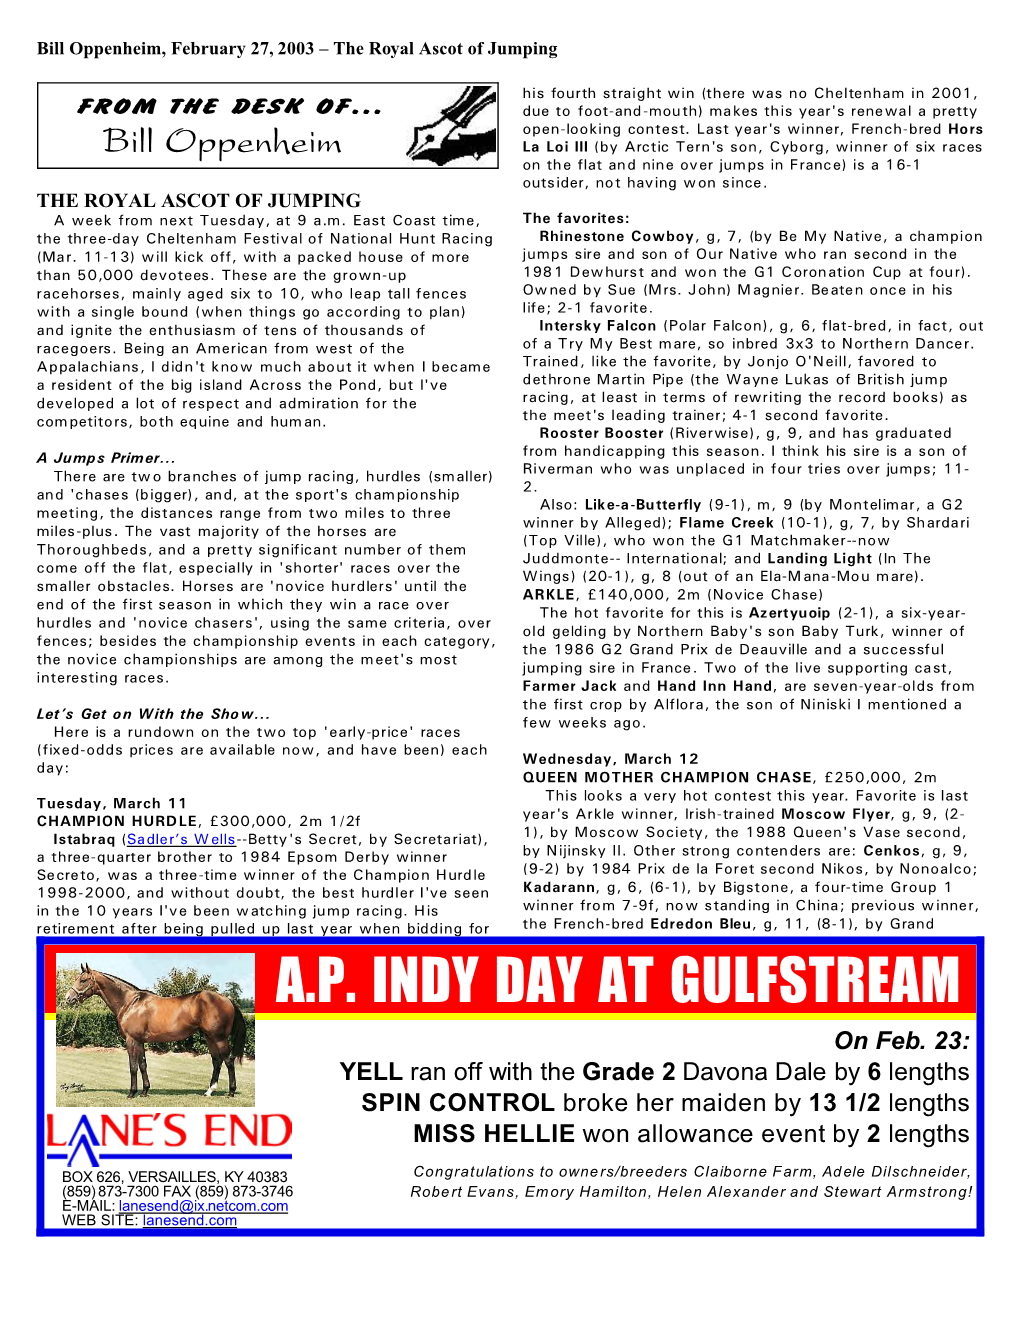 A.P. INDY DAY at GULFSTREAM on Feb